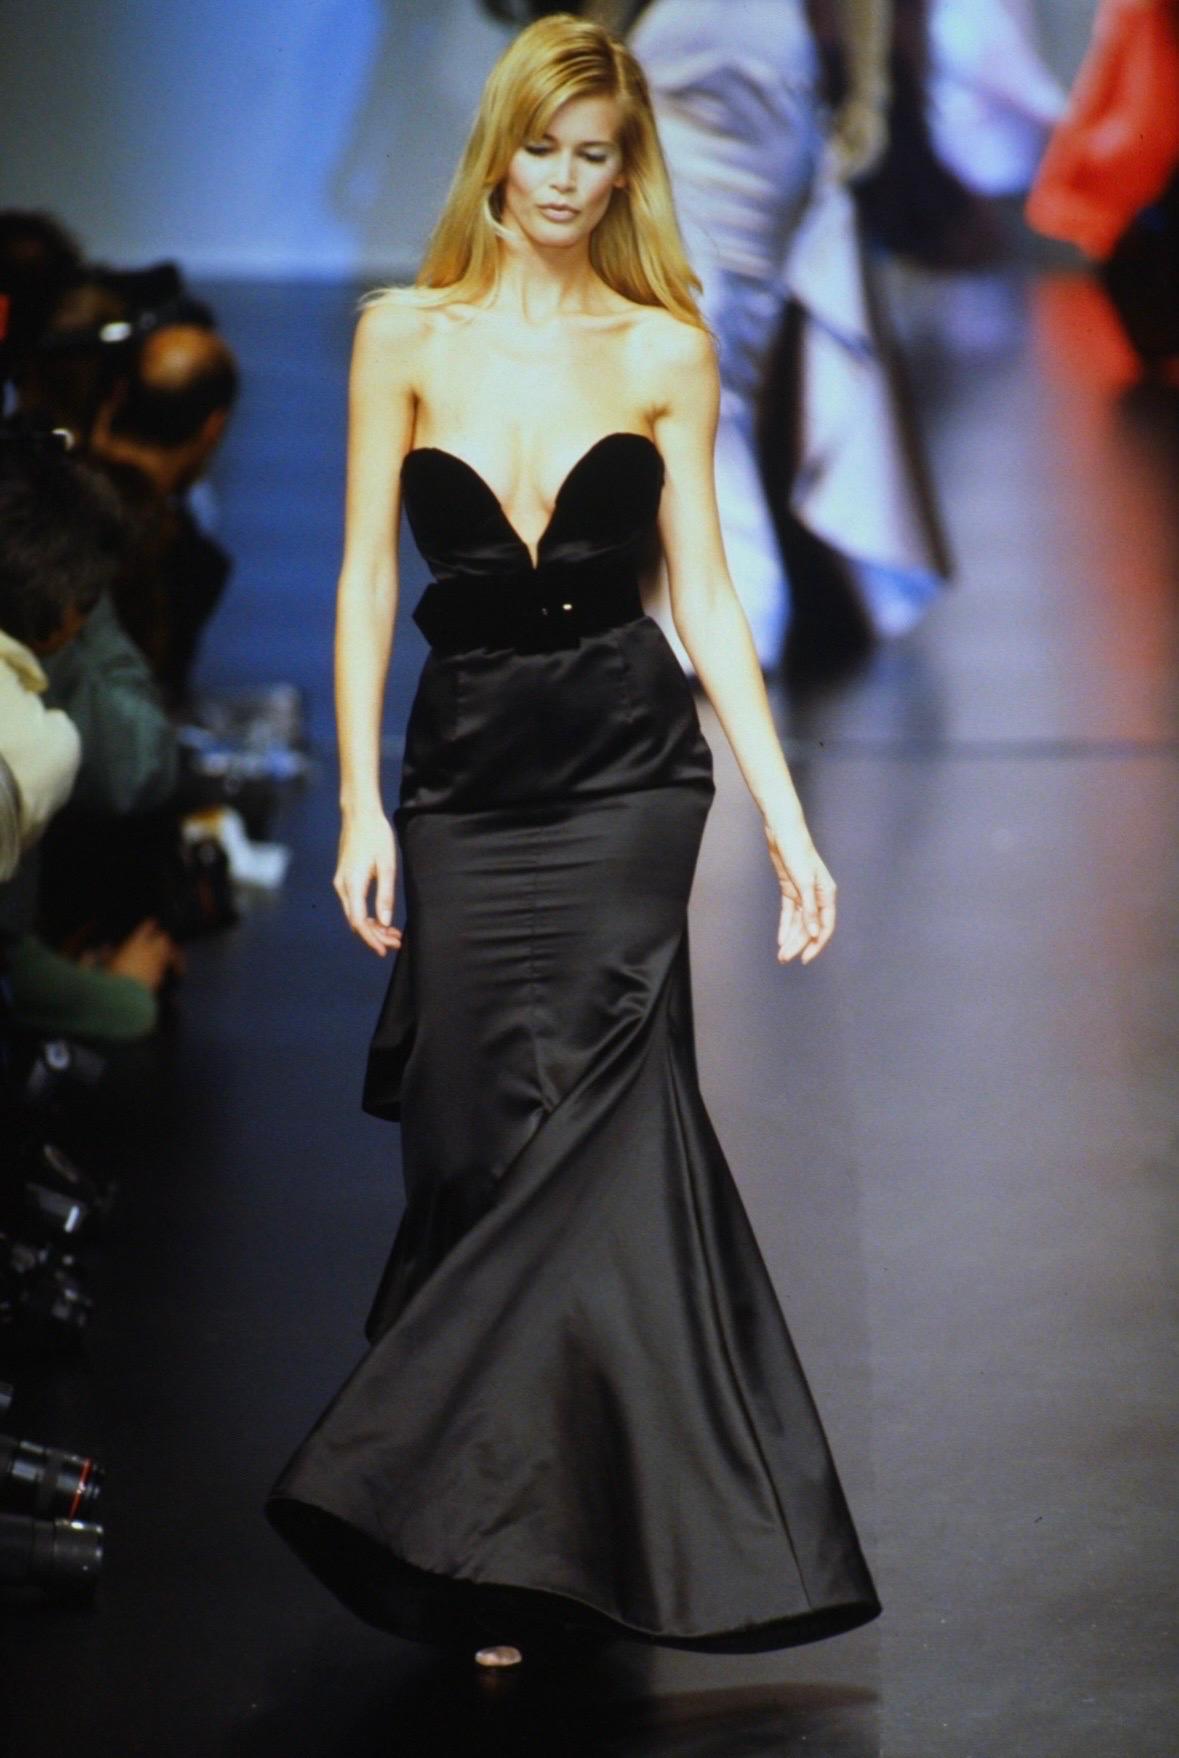 F/W 1995 Valentino Garavani Runway Black Satin Velvet Plunging Bust Gown In Excellent Condition For Sale In West Hollywood, CA